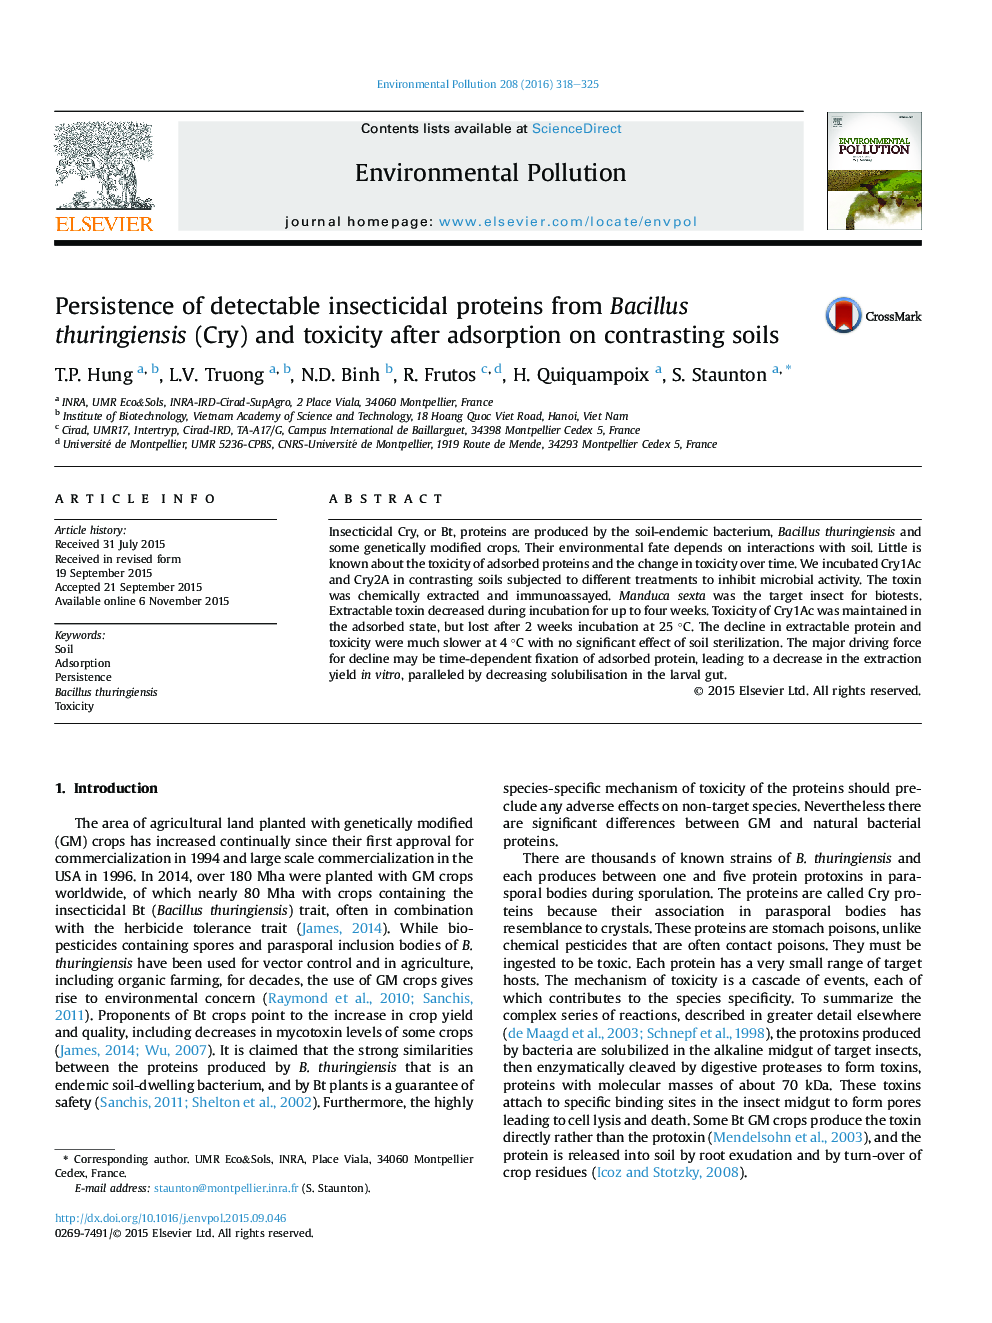 Persistence of detectable insecticidal proteins from Bacillus thuringiensis (Cry) and toxicity after adsorption on contrasting soils